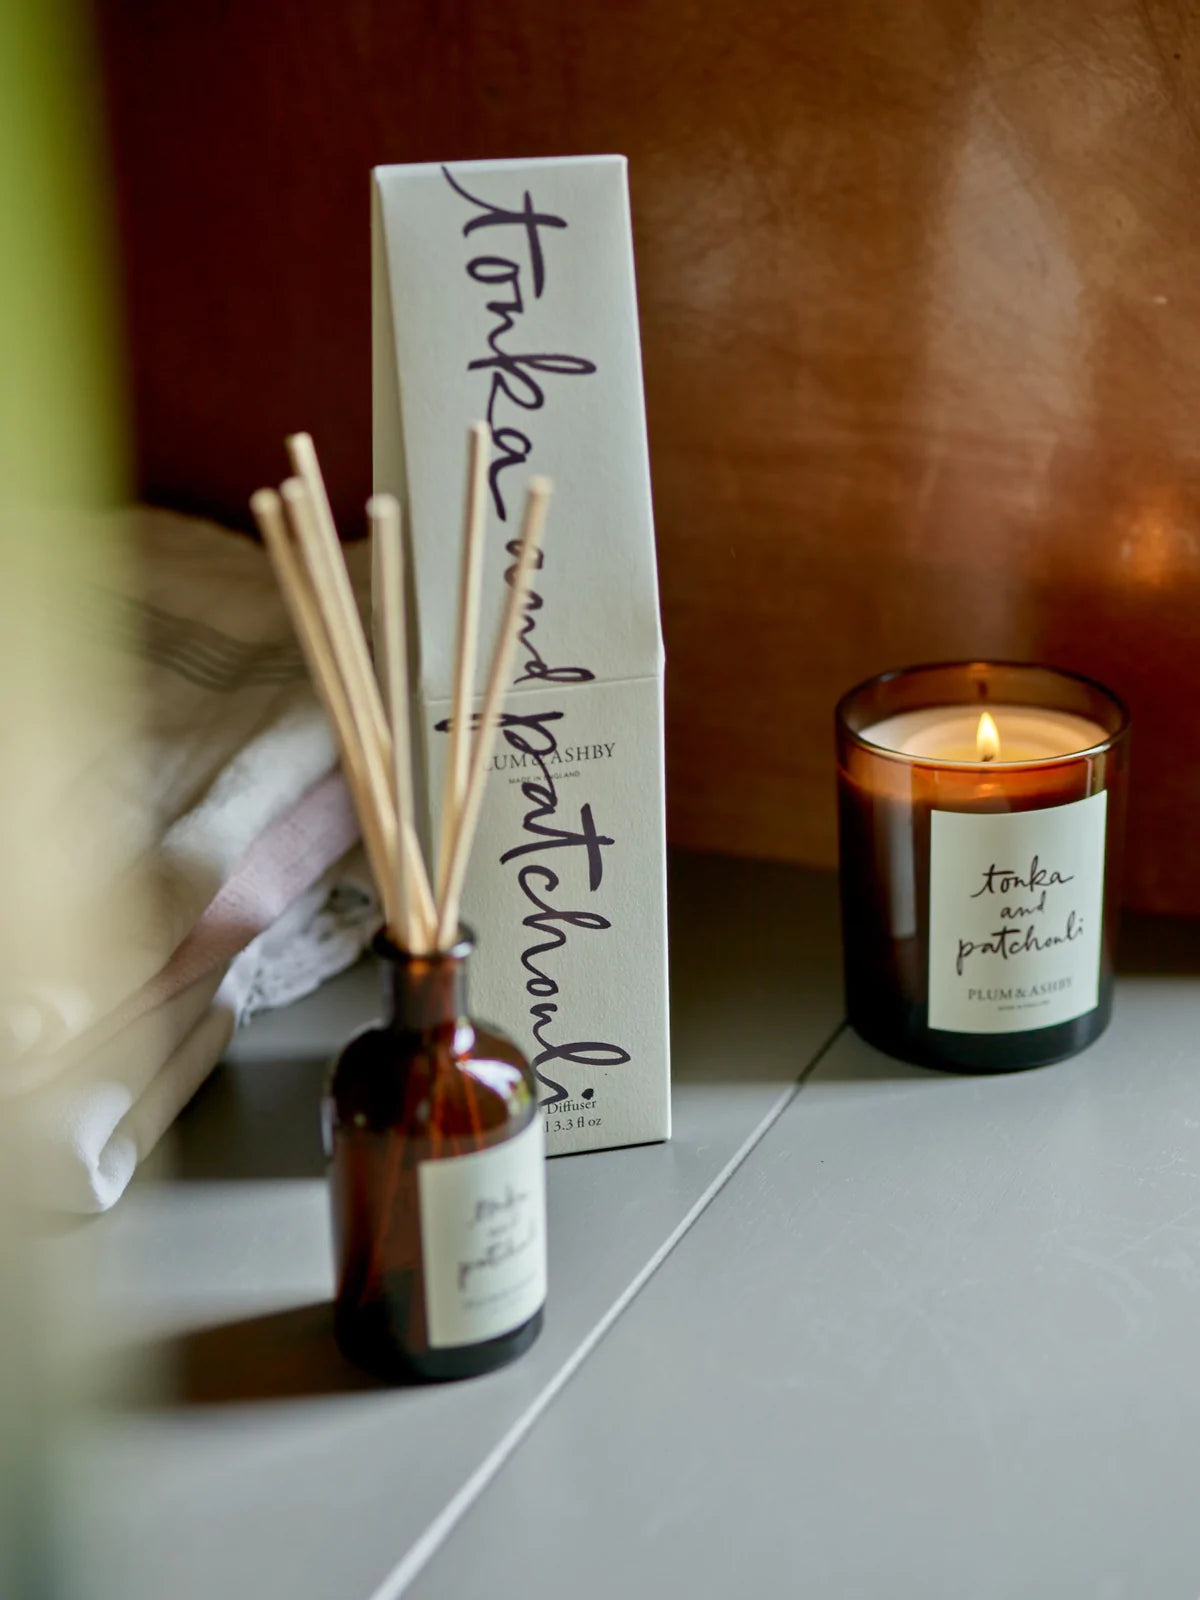 Plum & Ashby Diffuser : Tonka and Patchouli